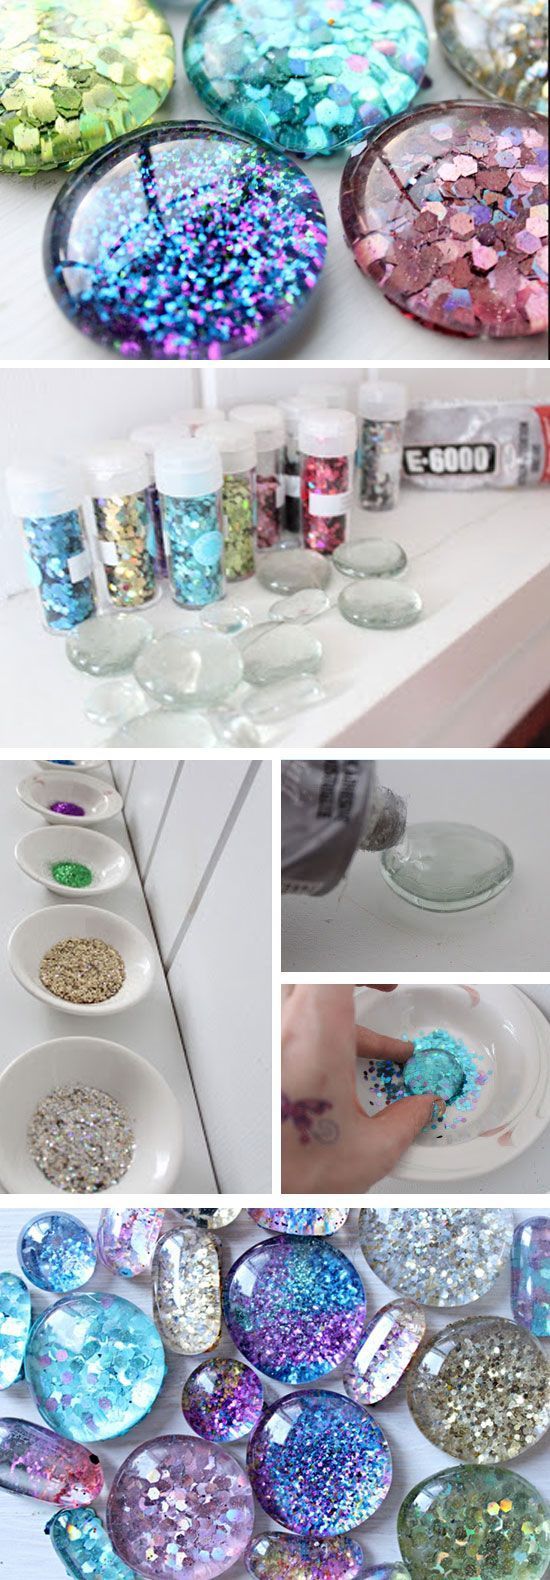 Glitter Magnets | Cheap and Easy Thank You Gifts: